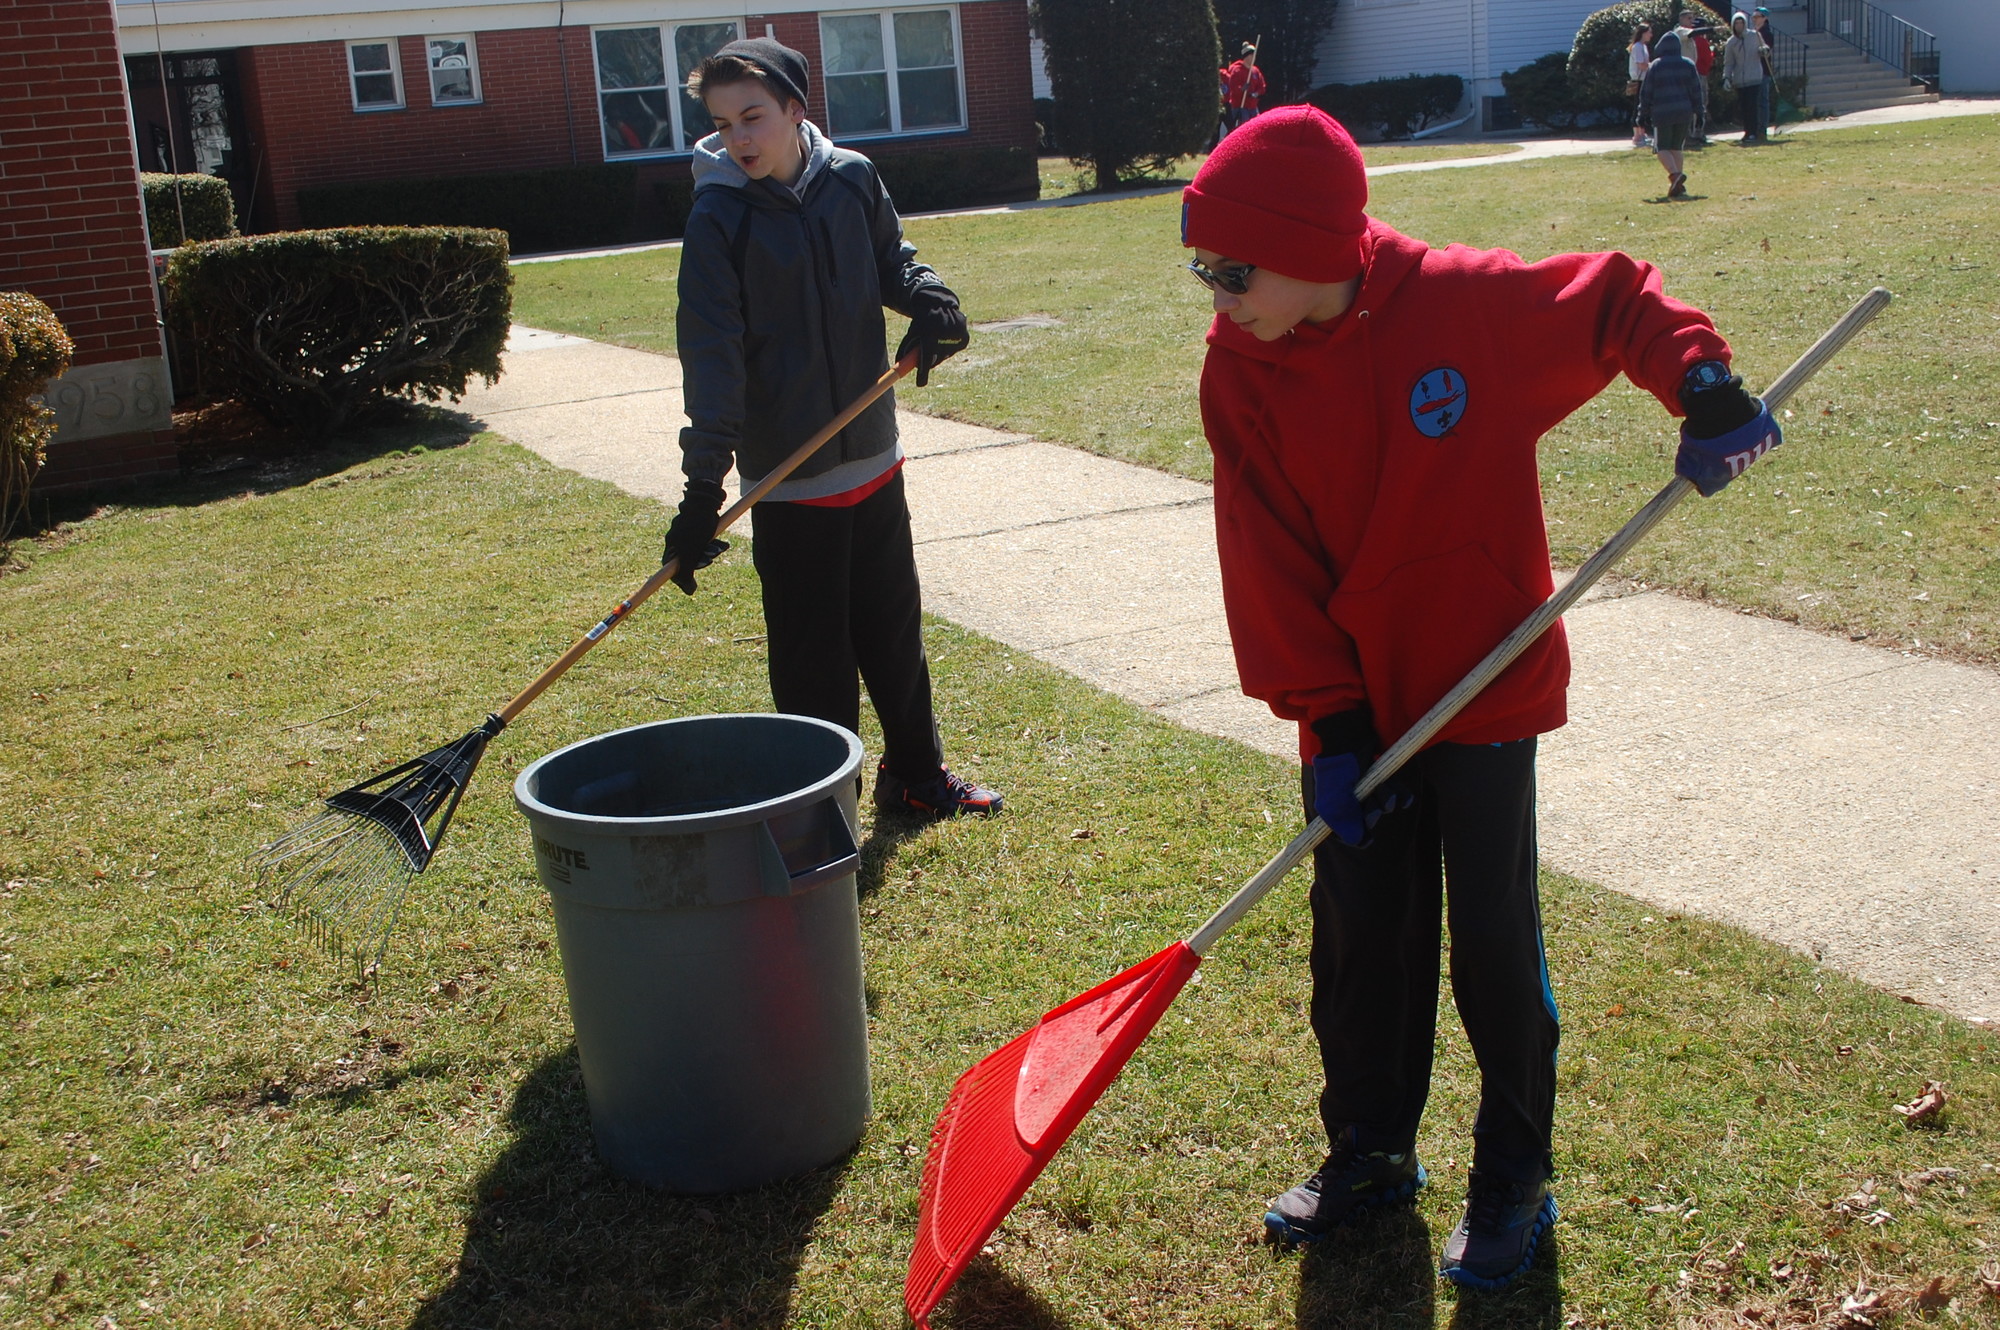 Michael Silverman, left, and Justin Reisert were among the Troop 96 Boy Scouts who helped out.